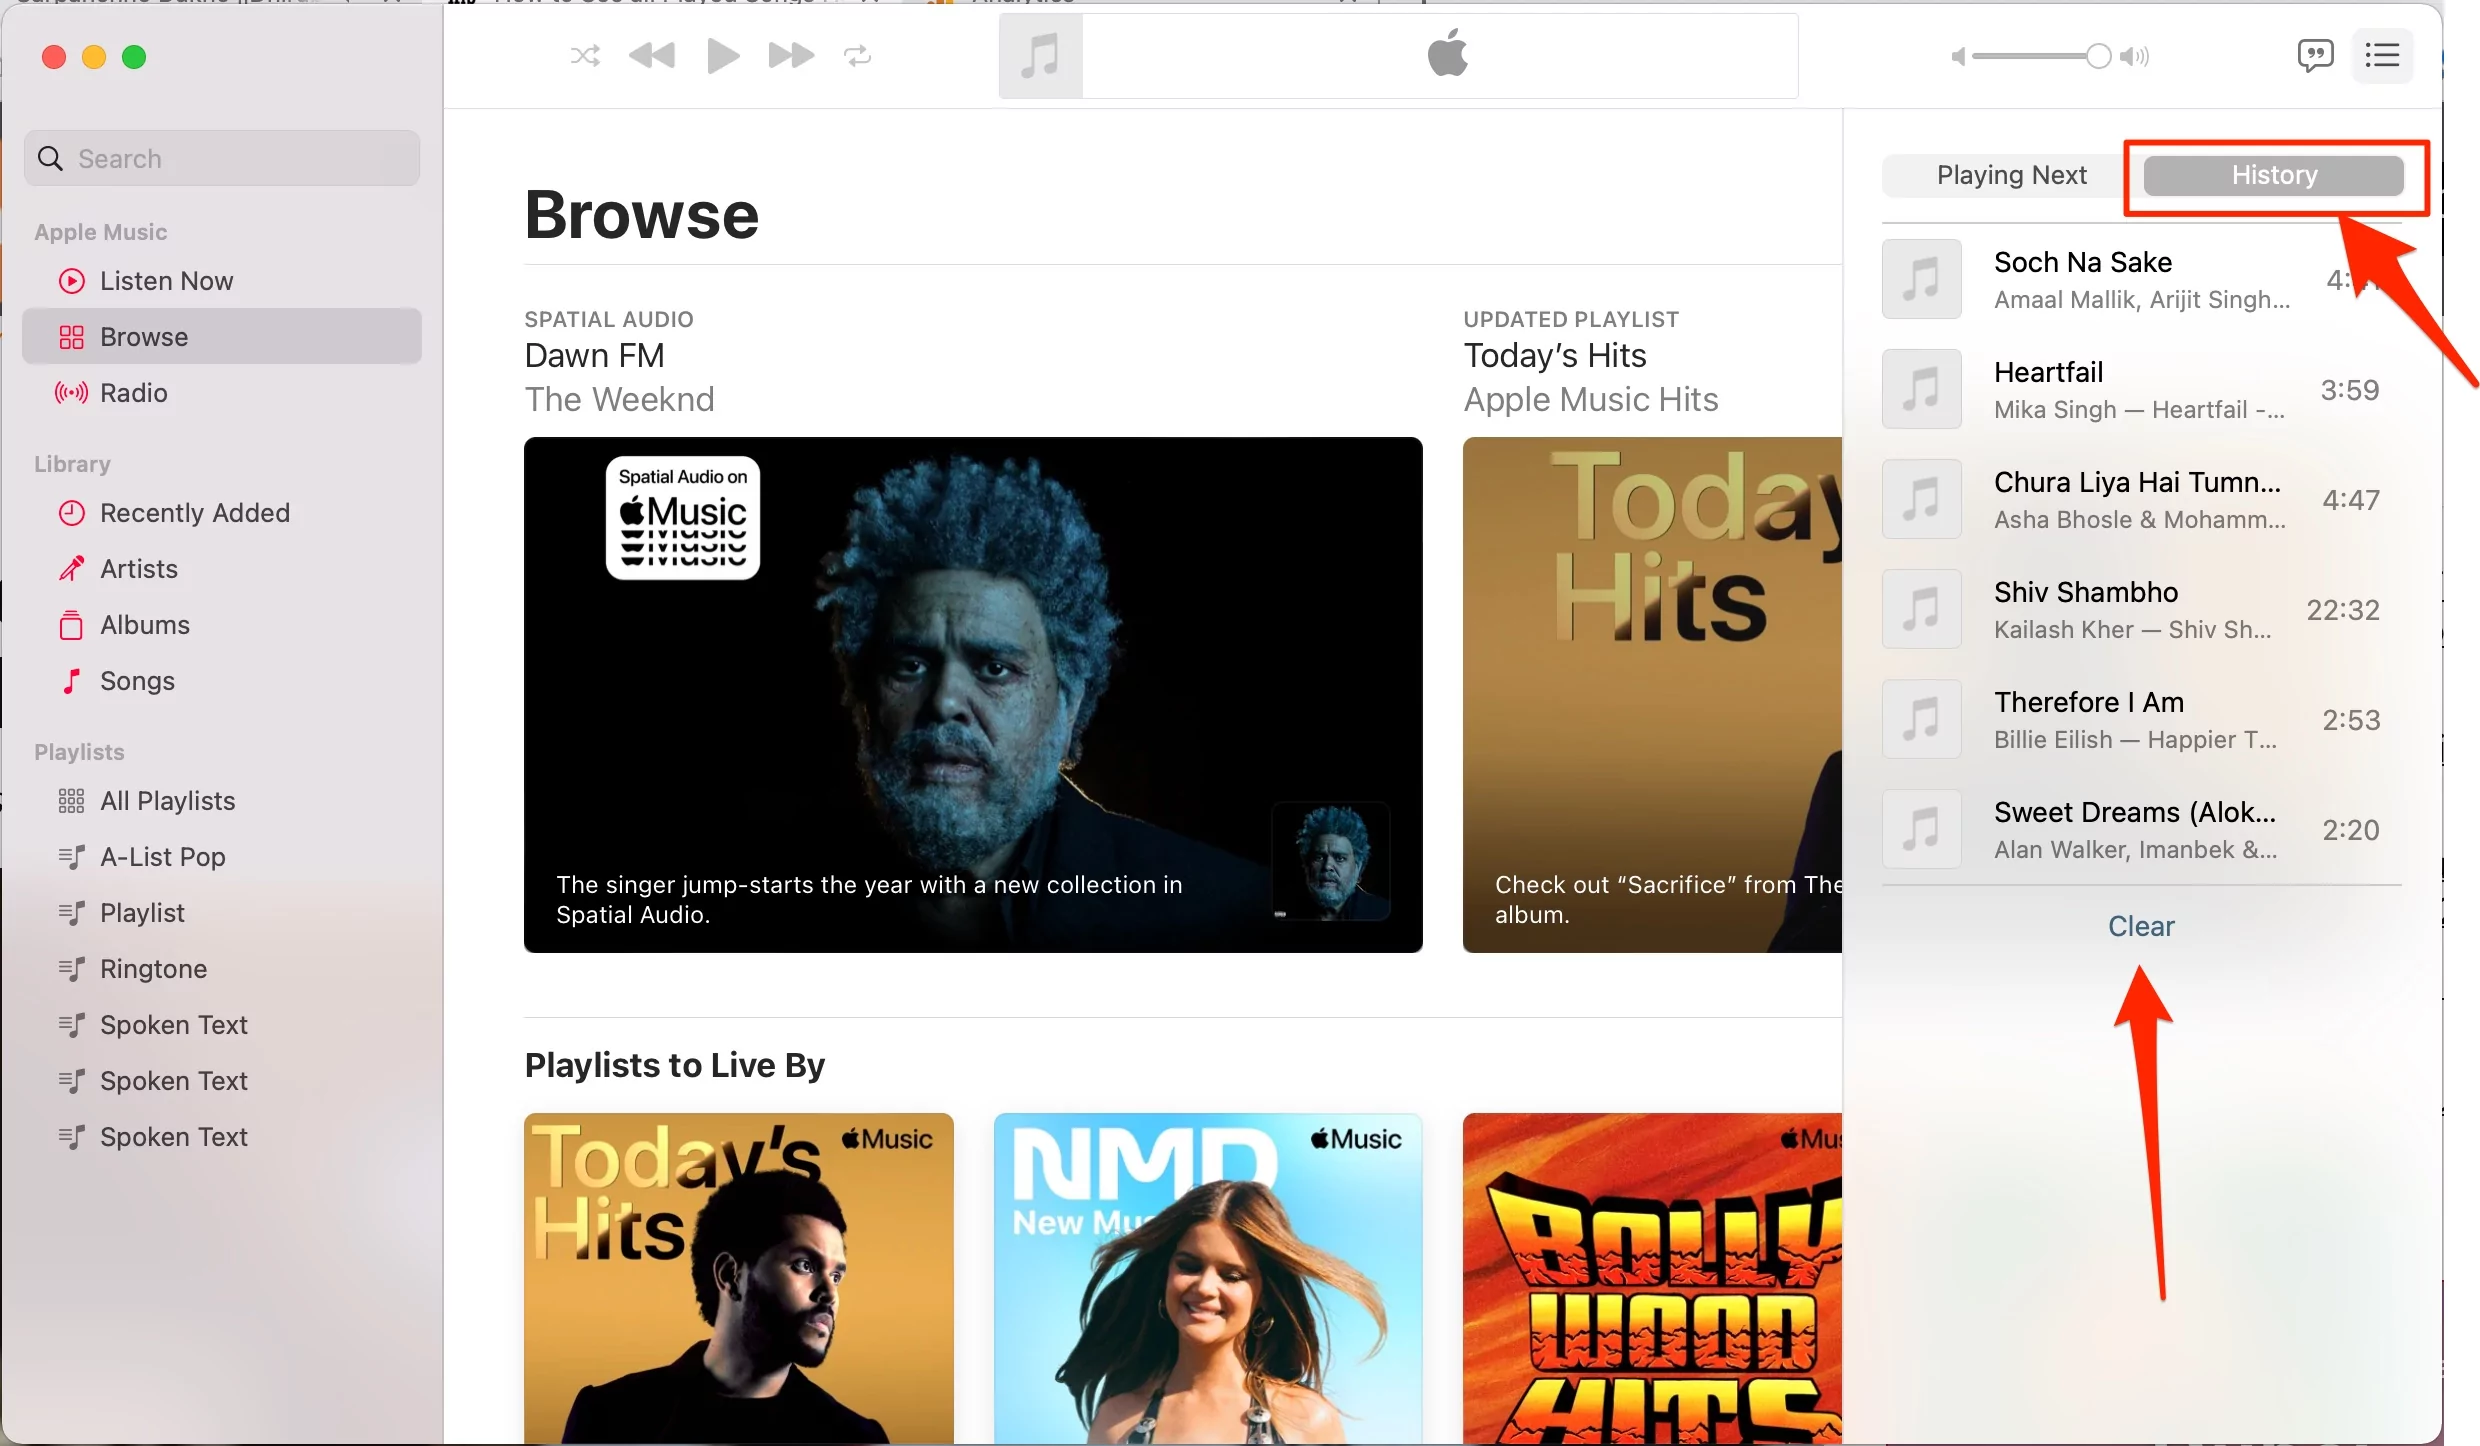 view-apple-music-from-played-songs-history-on-mac-and-clear-it